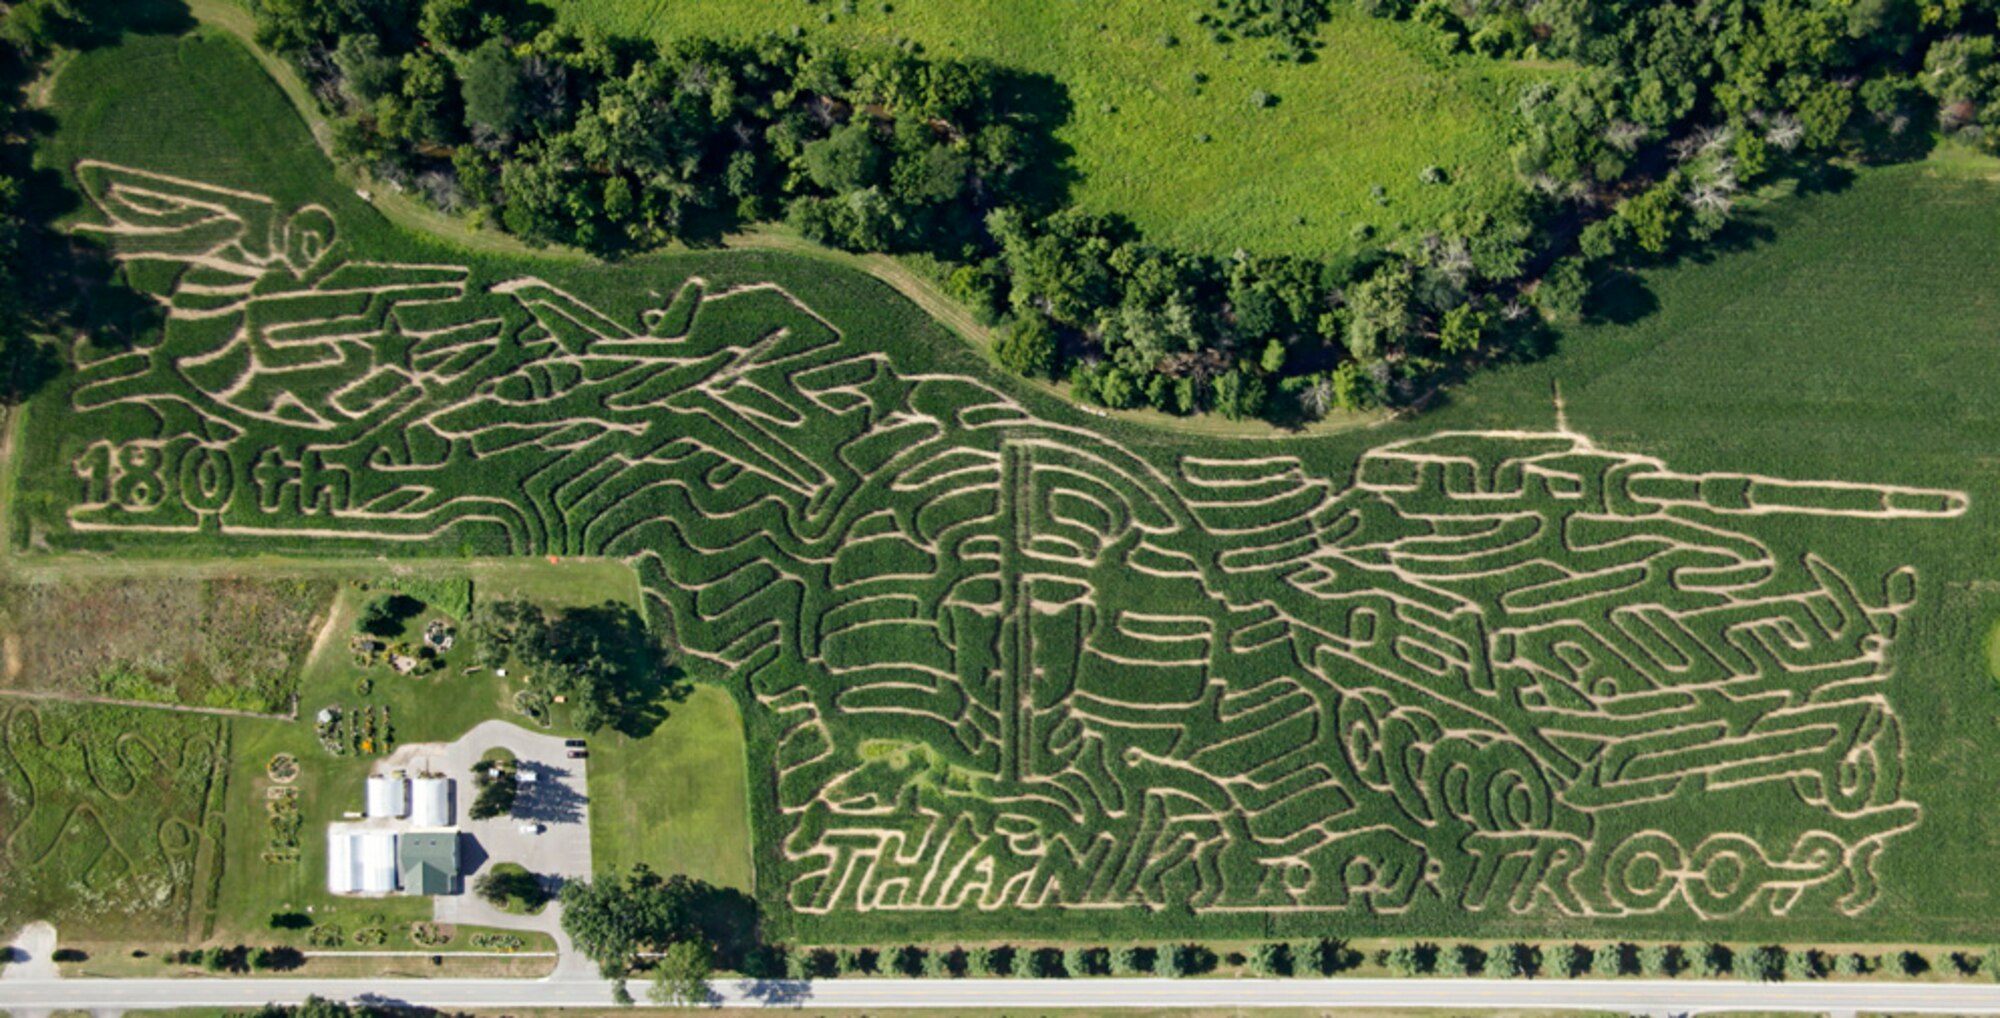 Mr. Duke Wheeler of Whitehouse, Ohio has created a military themed corn maze for the fall season to honor local soldiers, sailors, airmen, and marines.